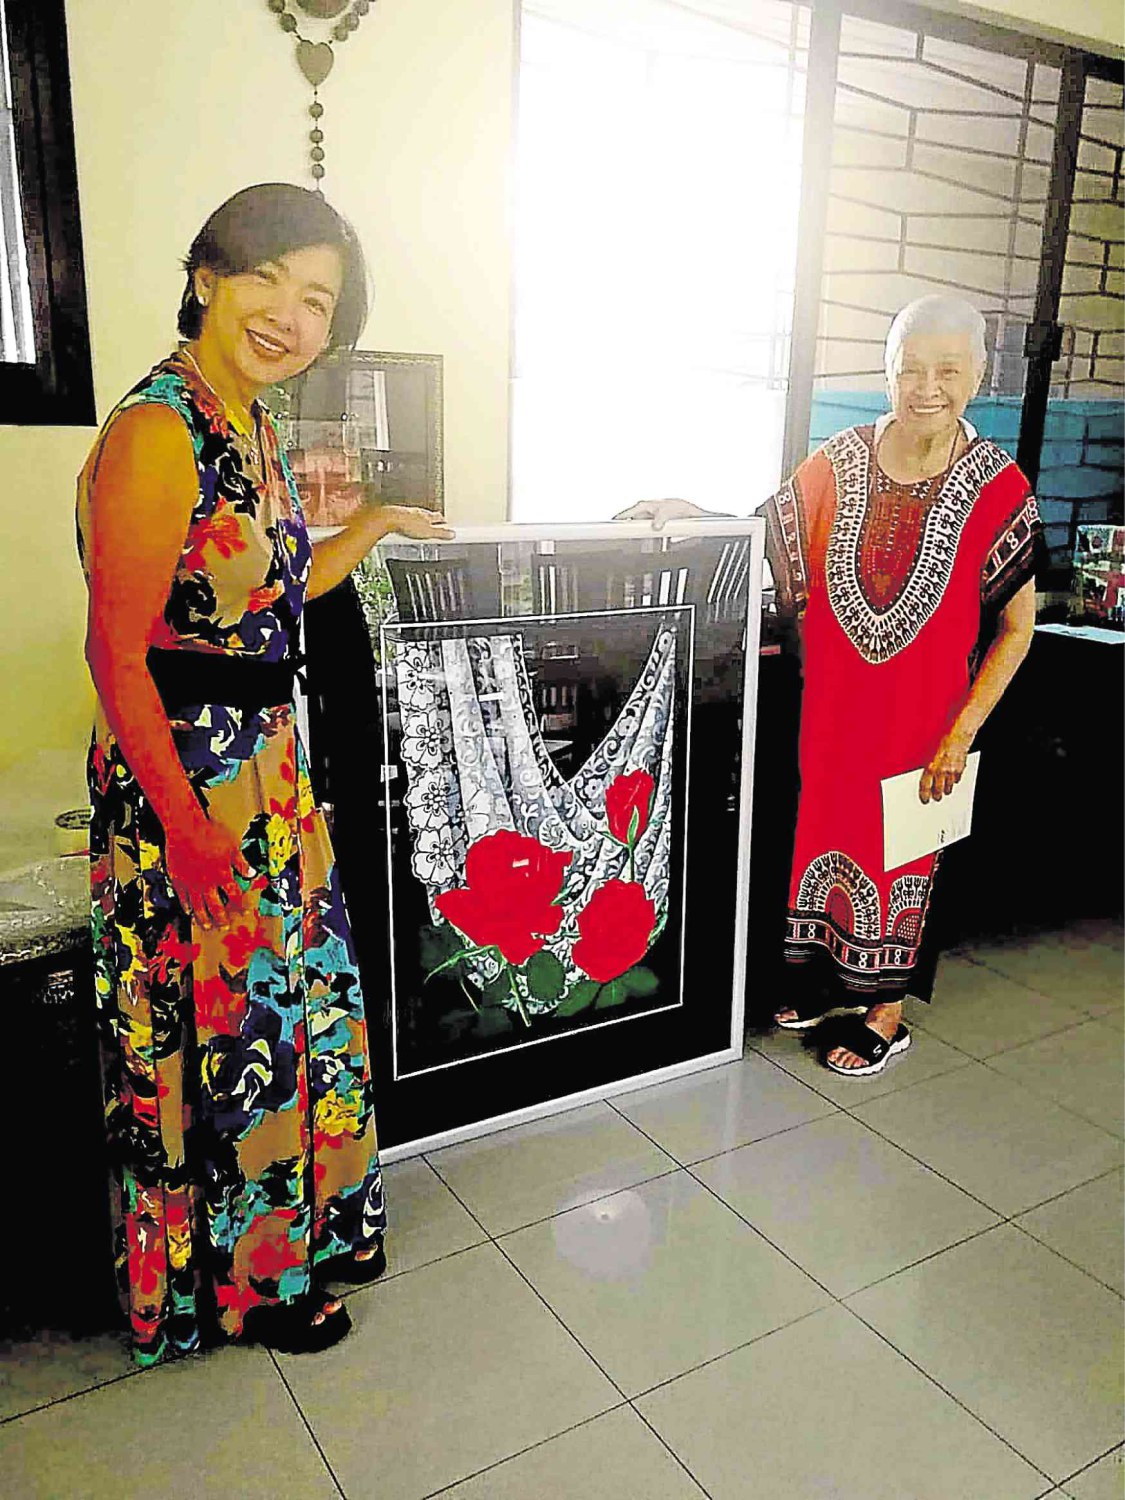 Isay Alvarez (left) and visual artist Cheloy Dans